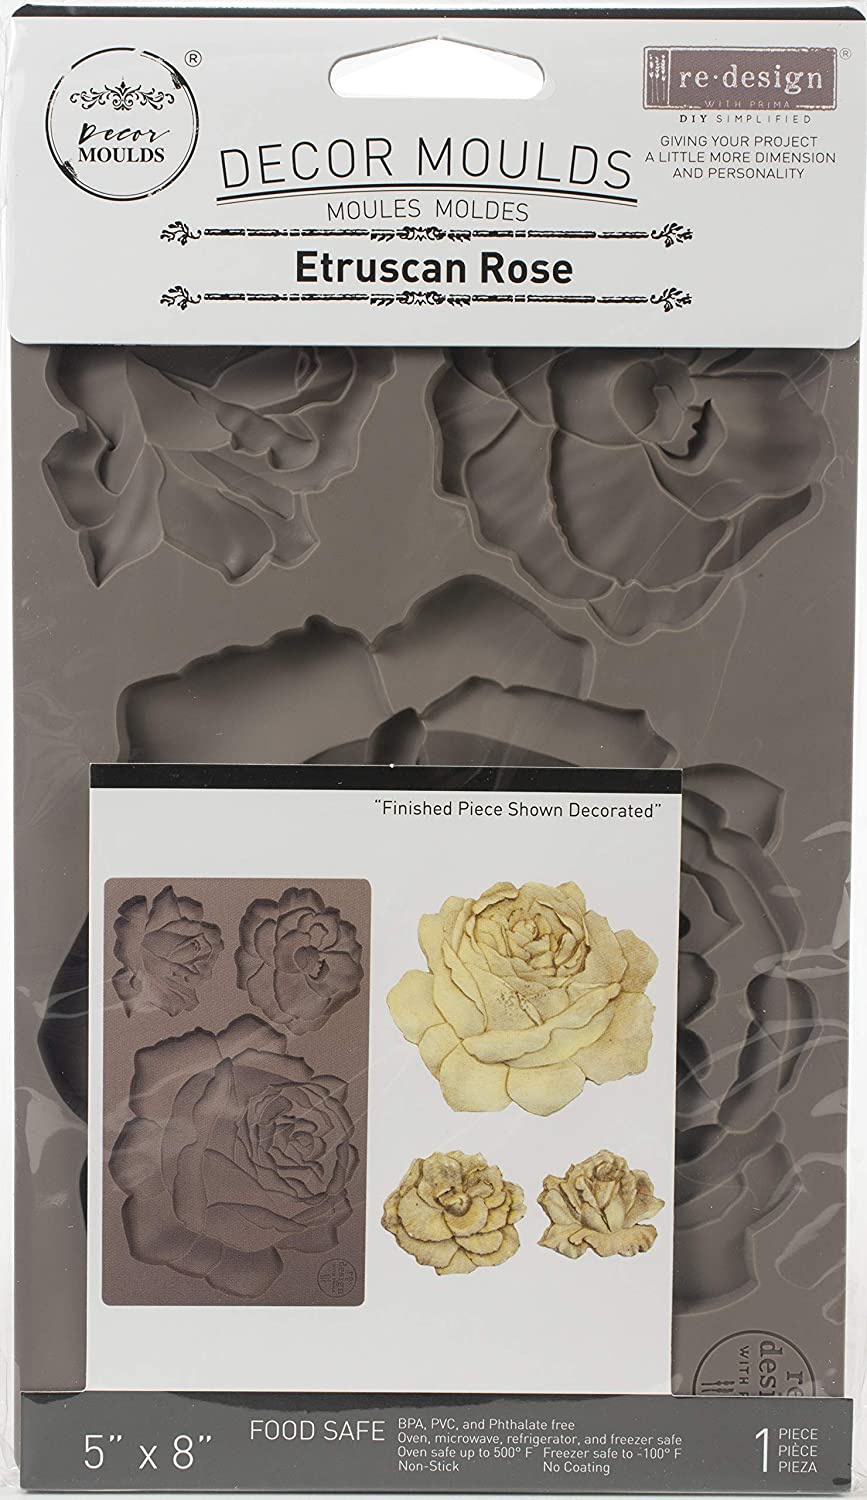 Redesign Decor Moulds 5″x8″ – Etruscan Rose